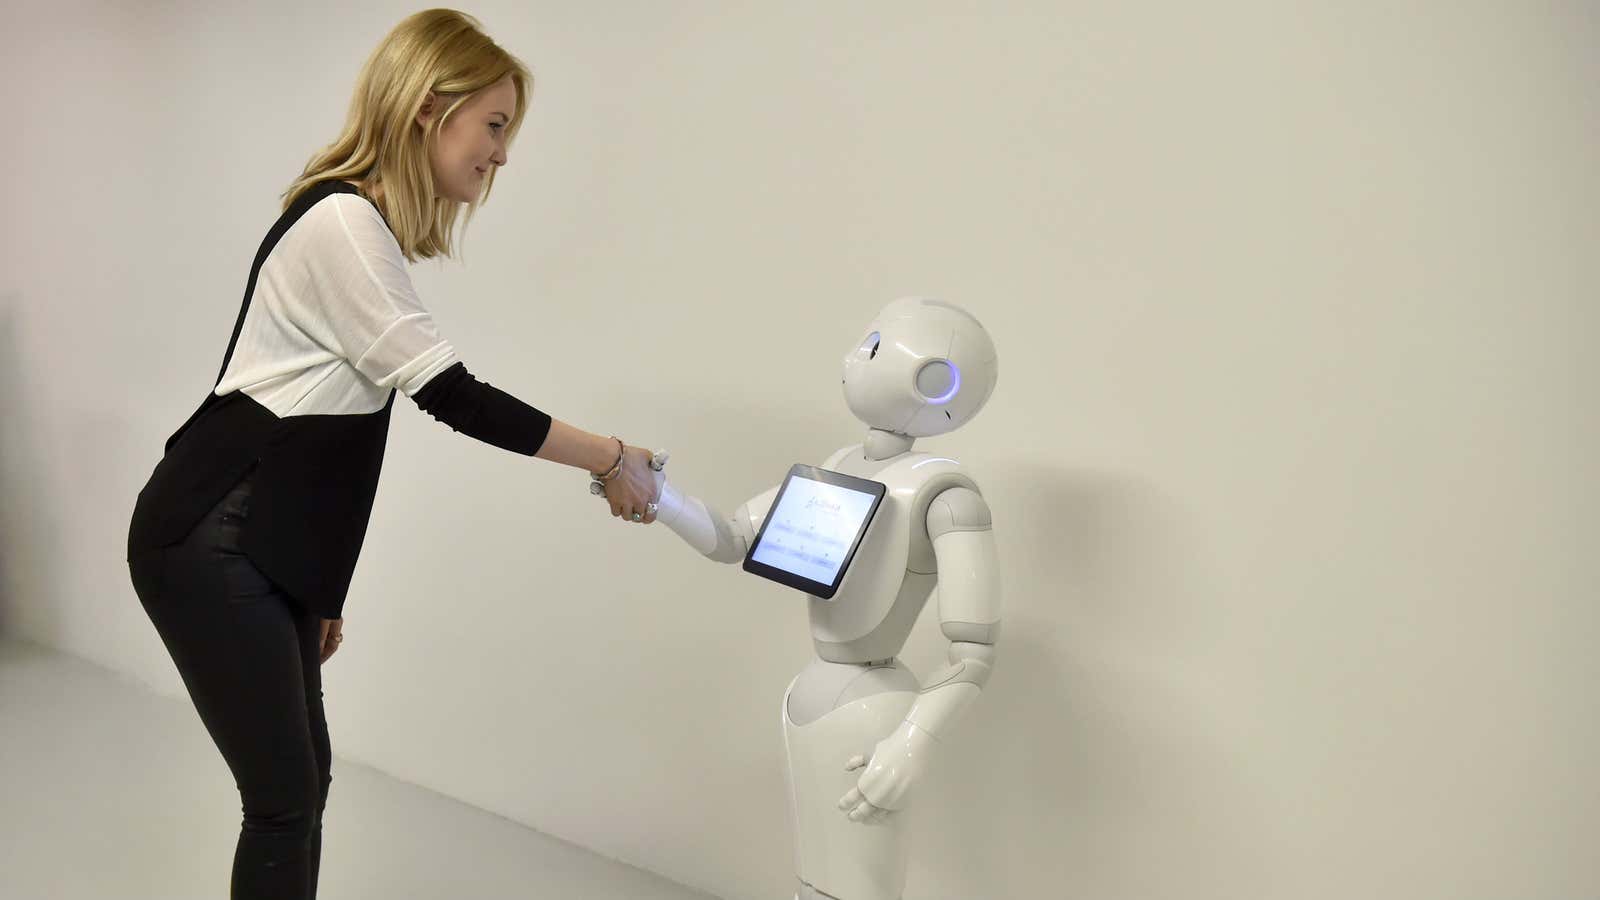 Experts predict humans will do more than shake hands with robots.